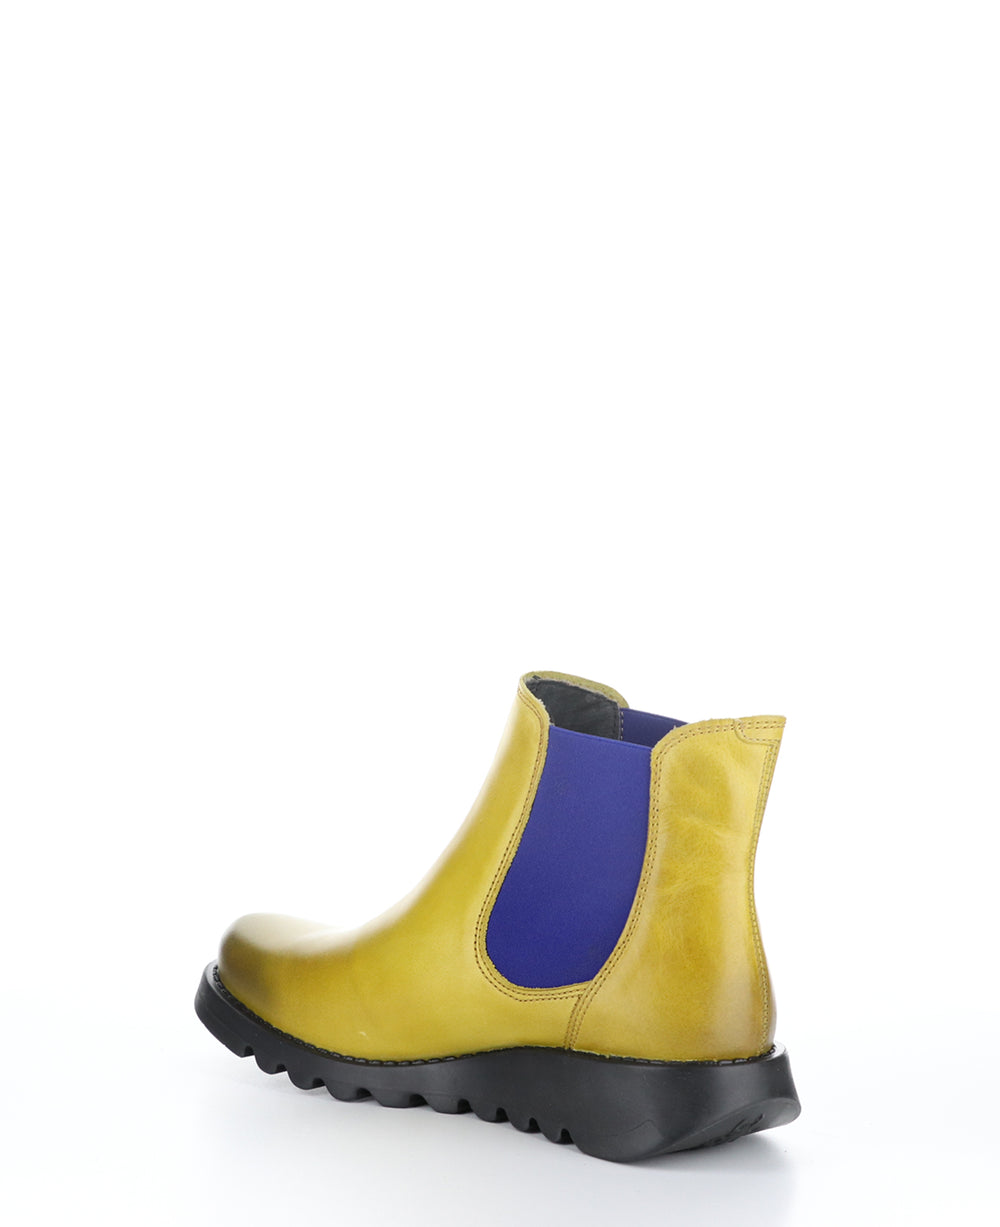 SALV Mustard Round Toe Ankle Boots